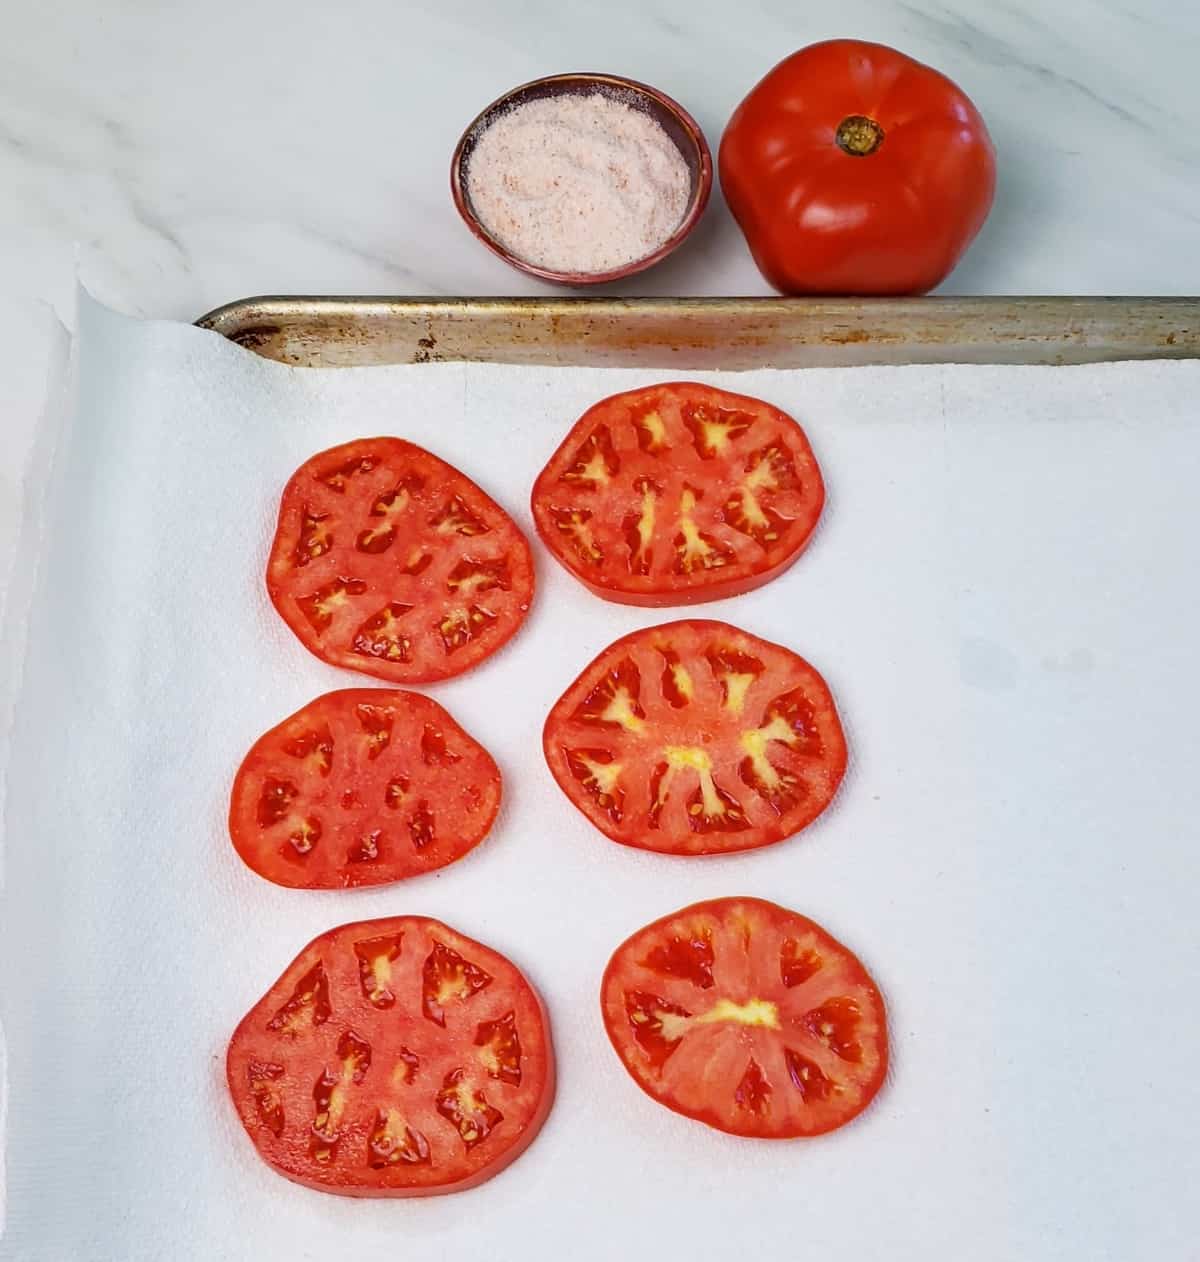 sliced tomatoes on paper towels on a baking pan. A tiny dish of pink salt and a tomato is next to pan